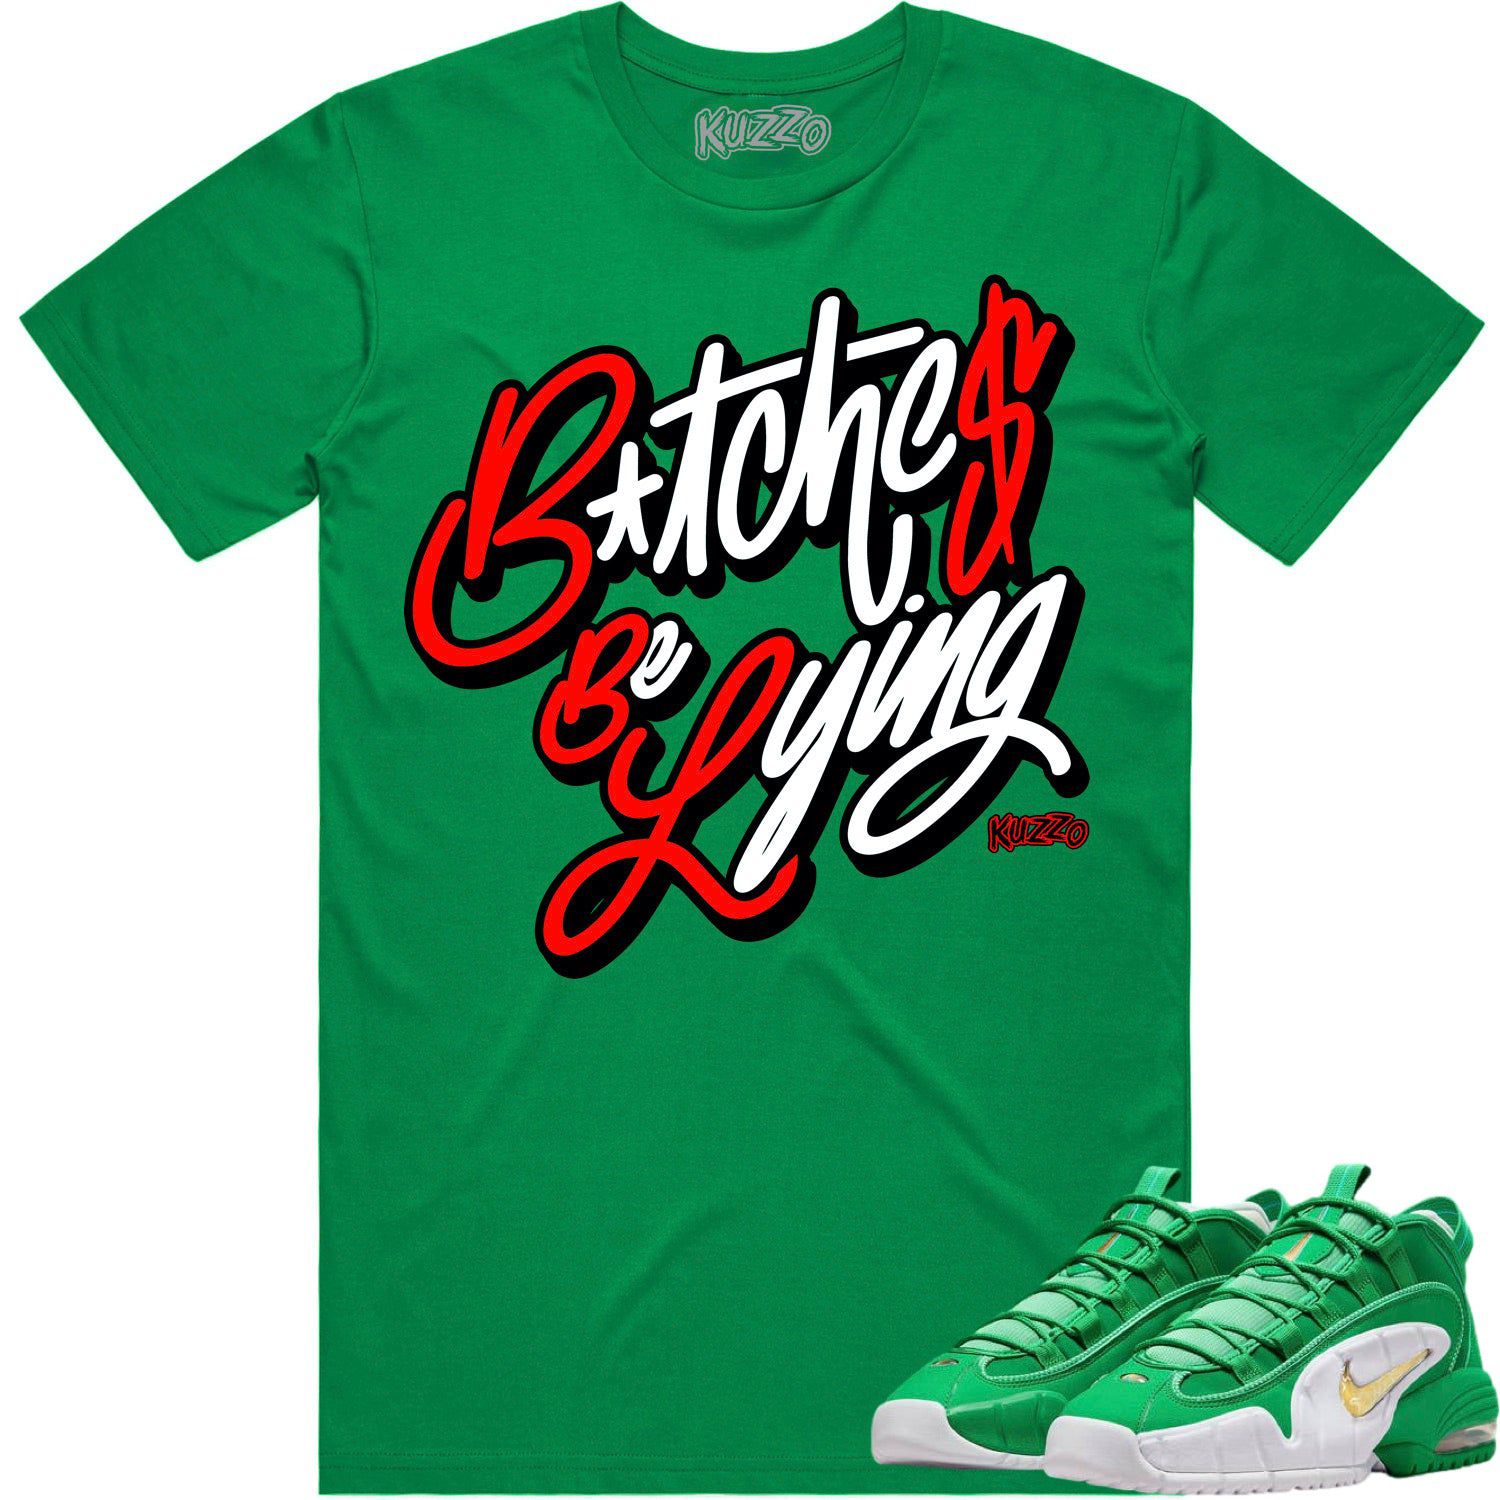 Penny 1 Stadium Green 1s Shirt - Sneaker Tees - Red BBL